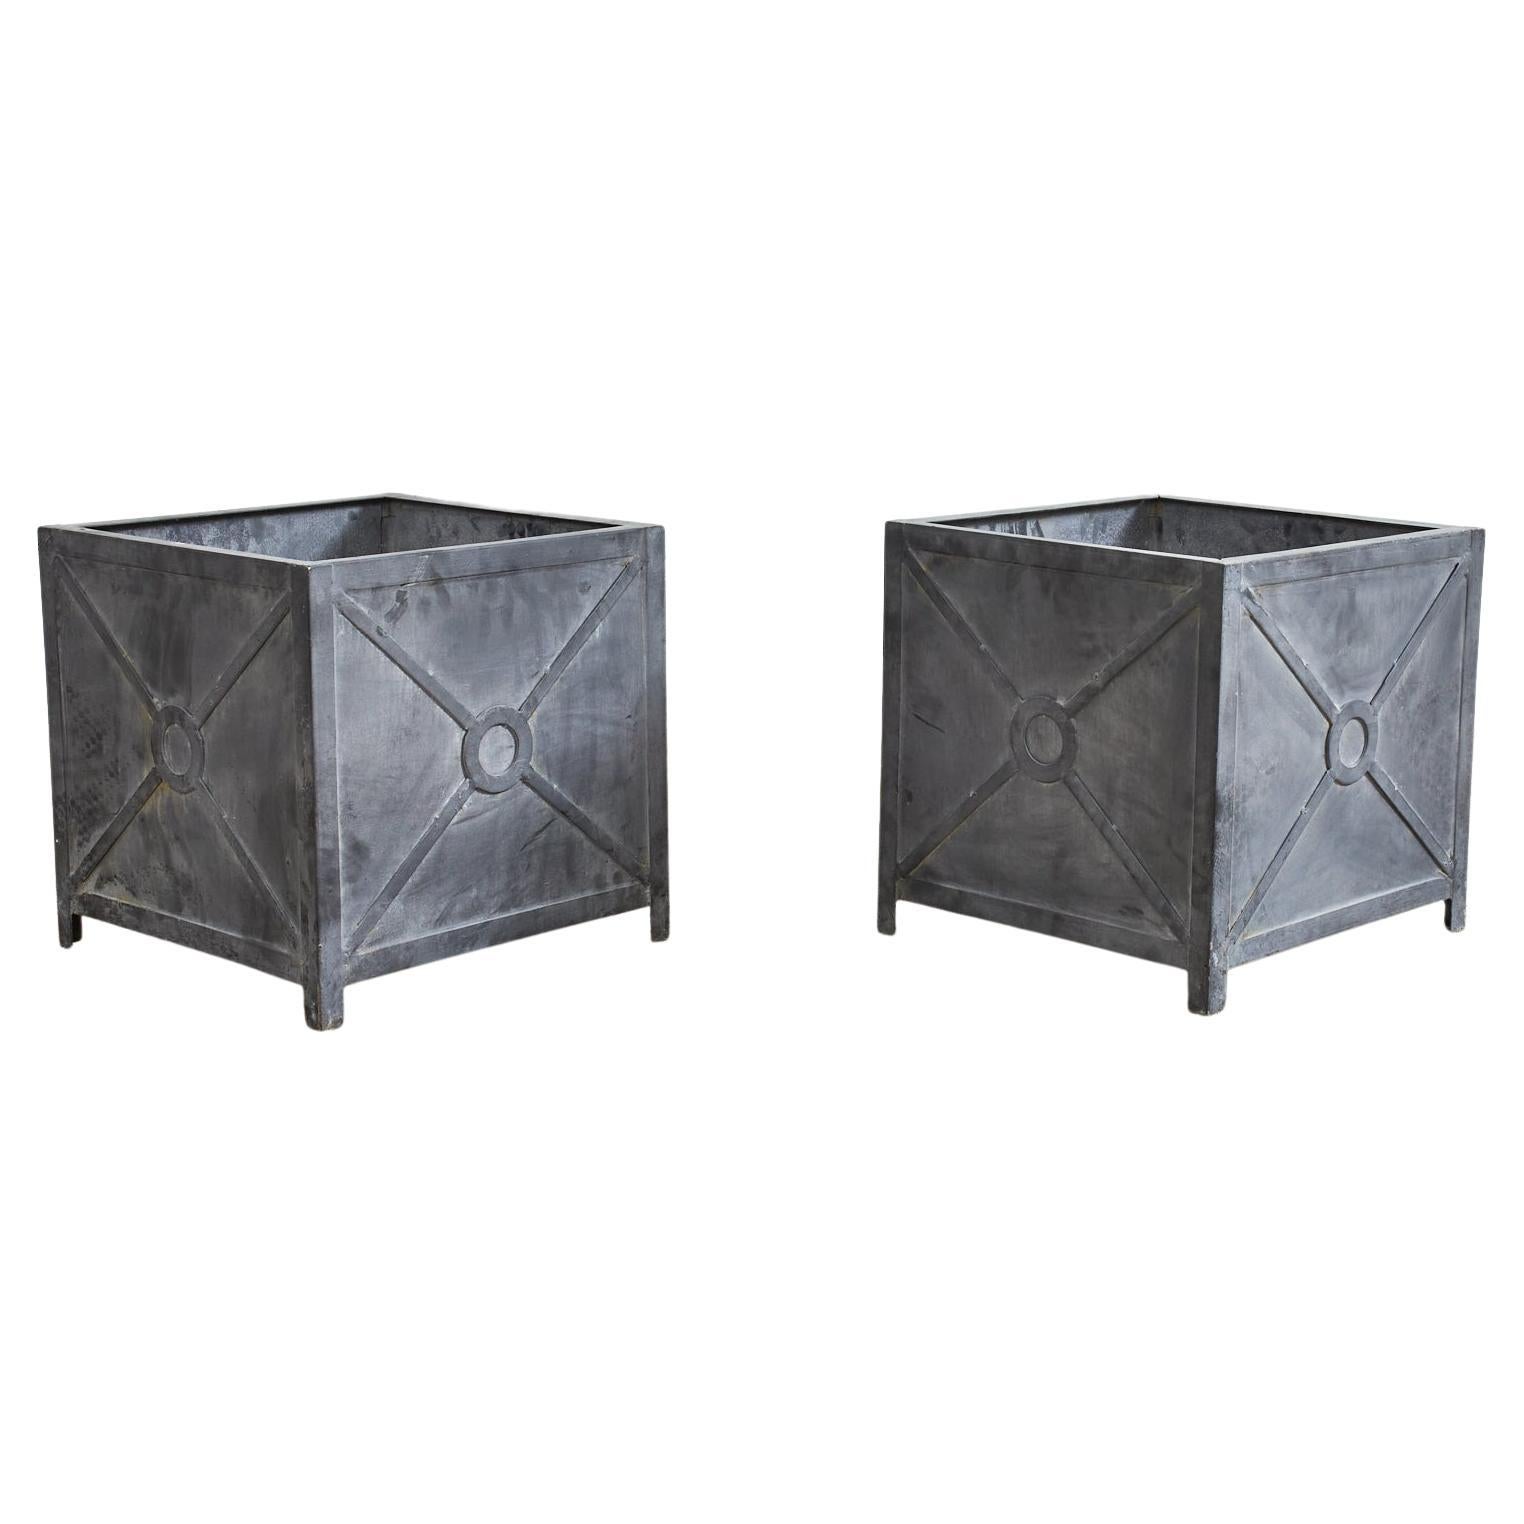 Pair of Neoclassical Style Square Zinc Garden Planters